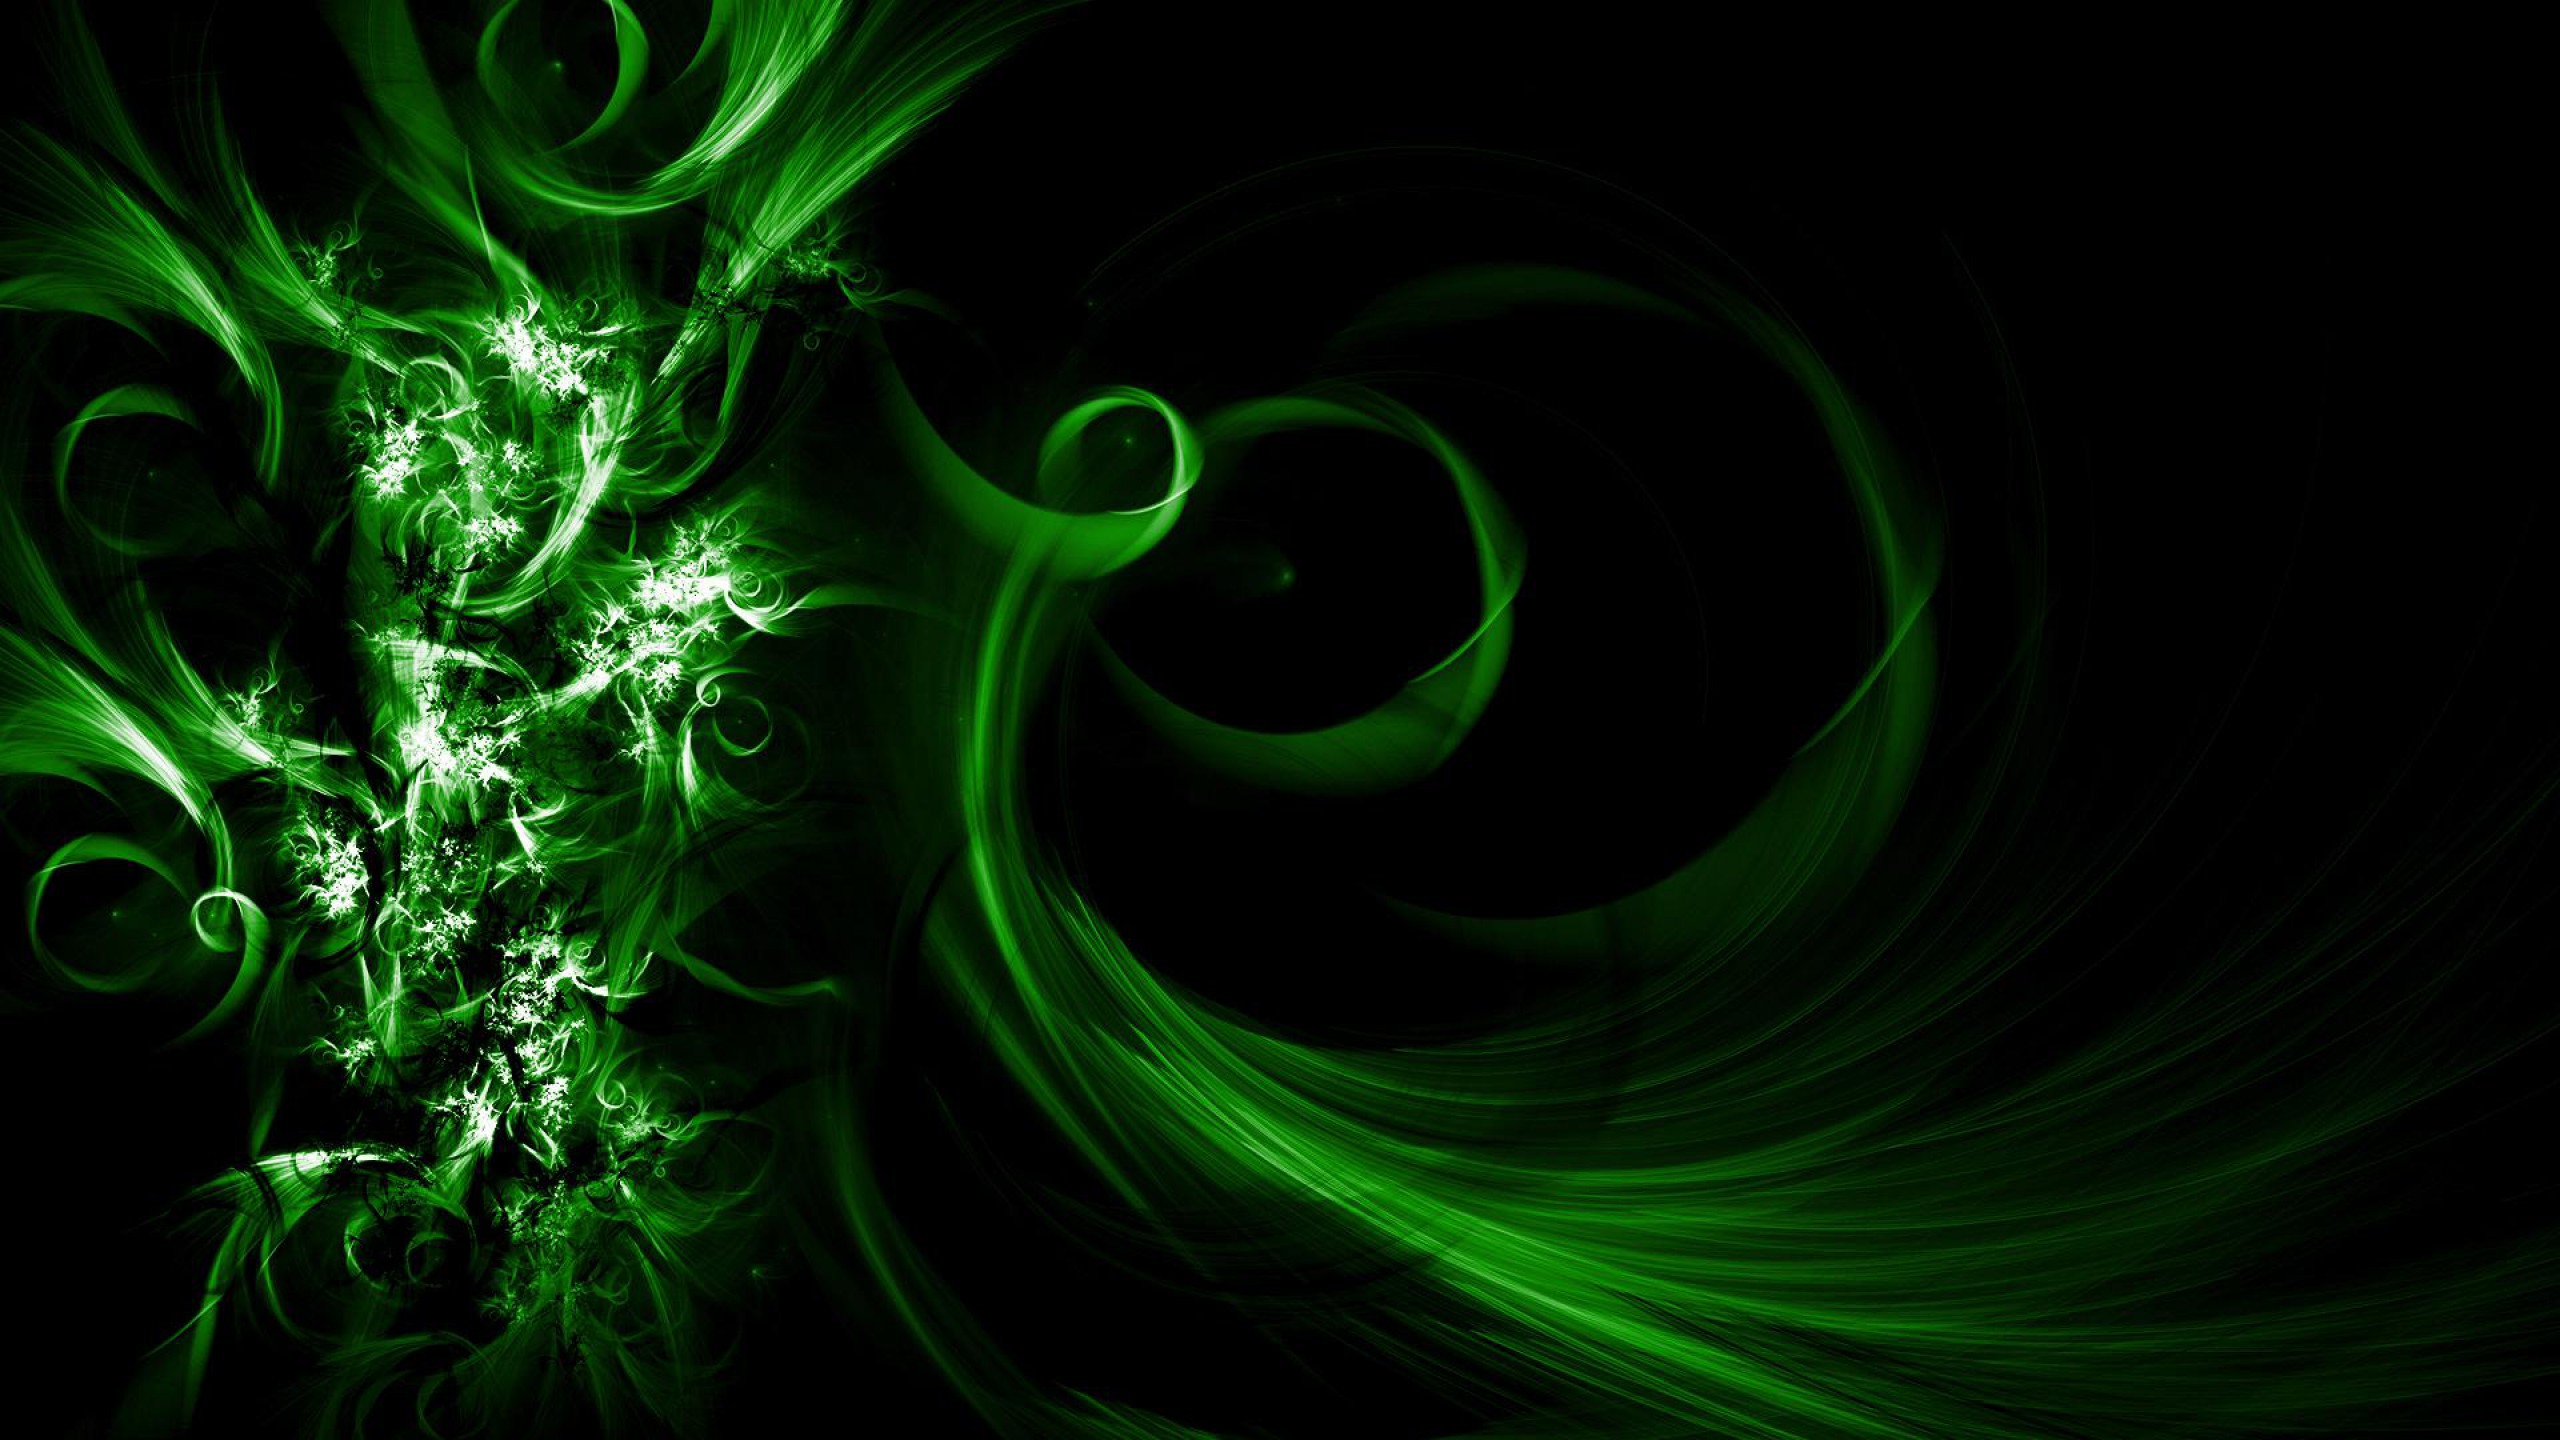 cool abstract hd wallpapers #9